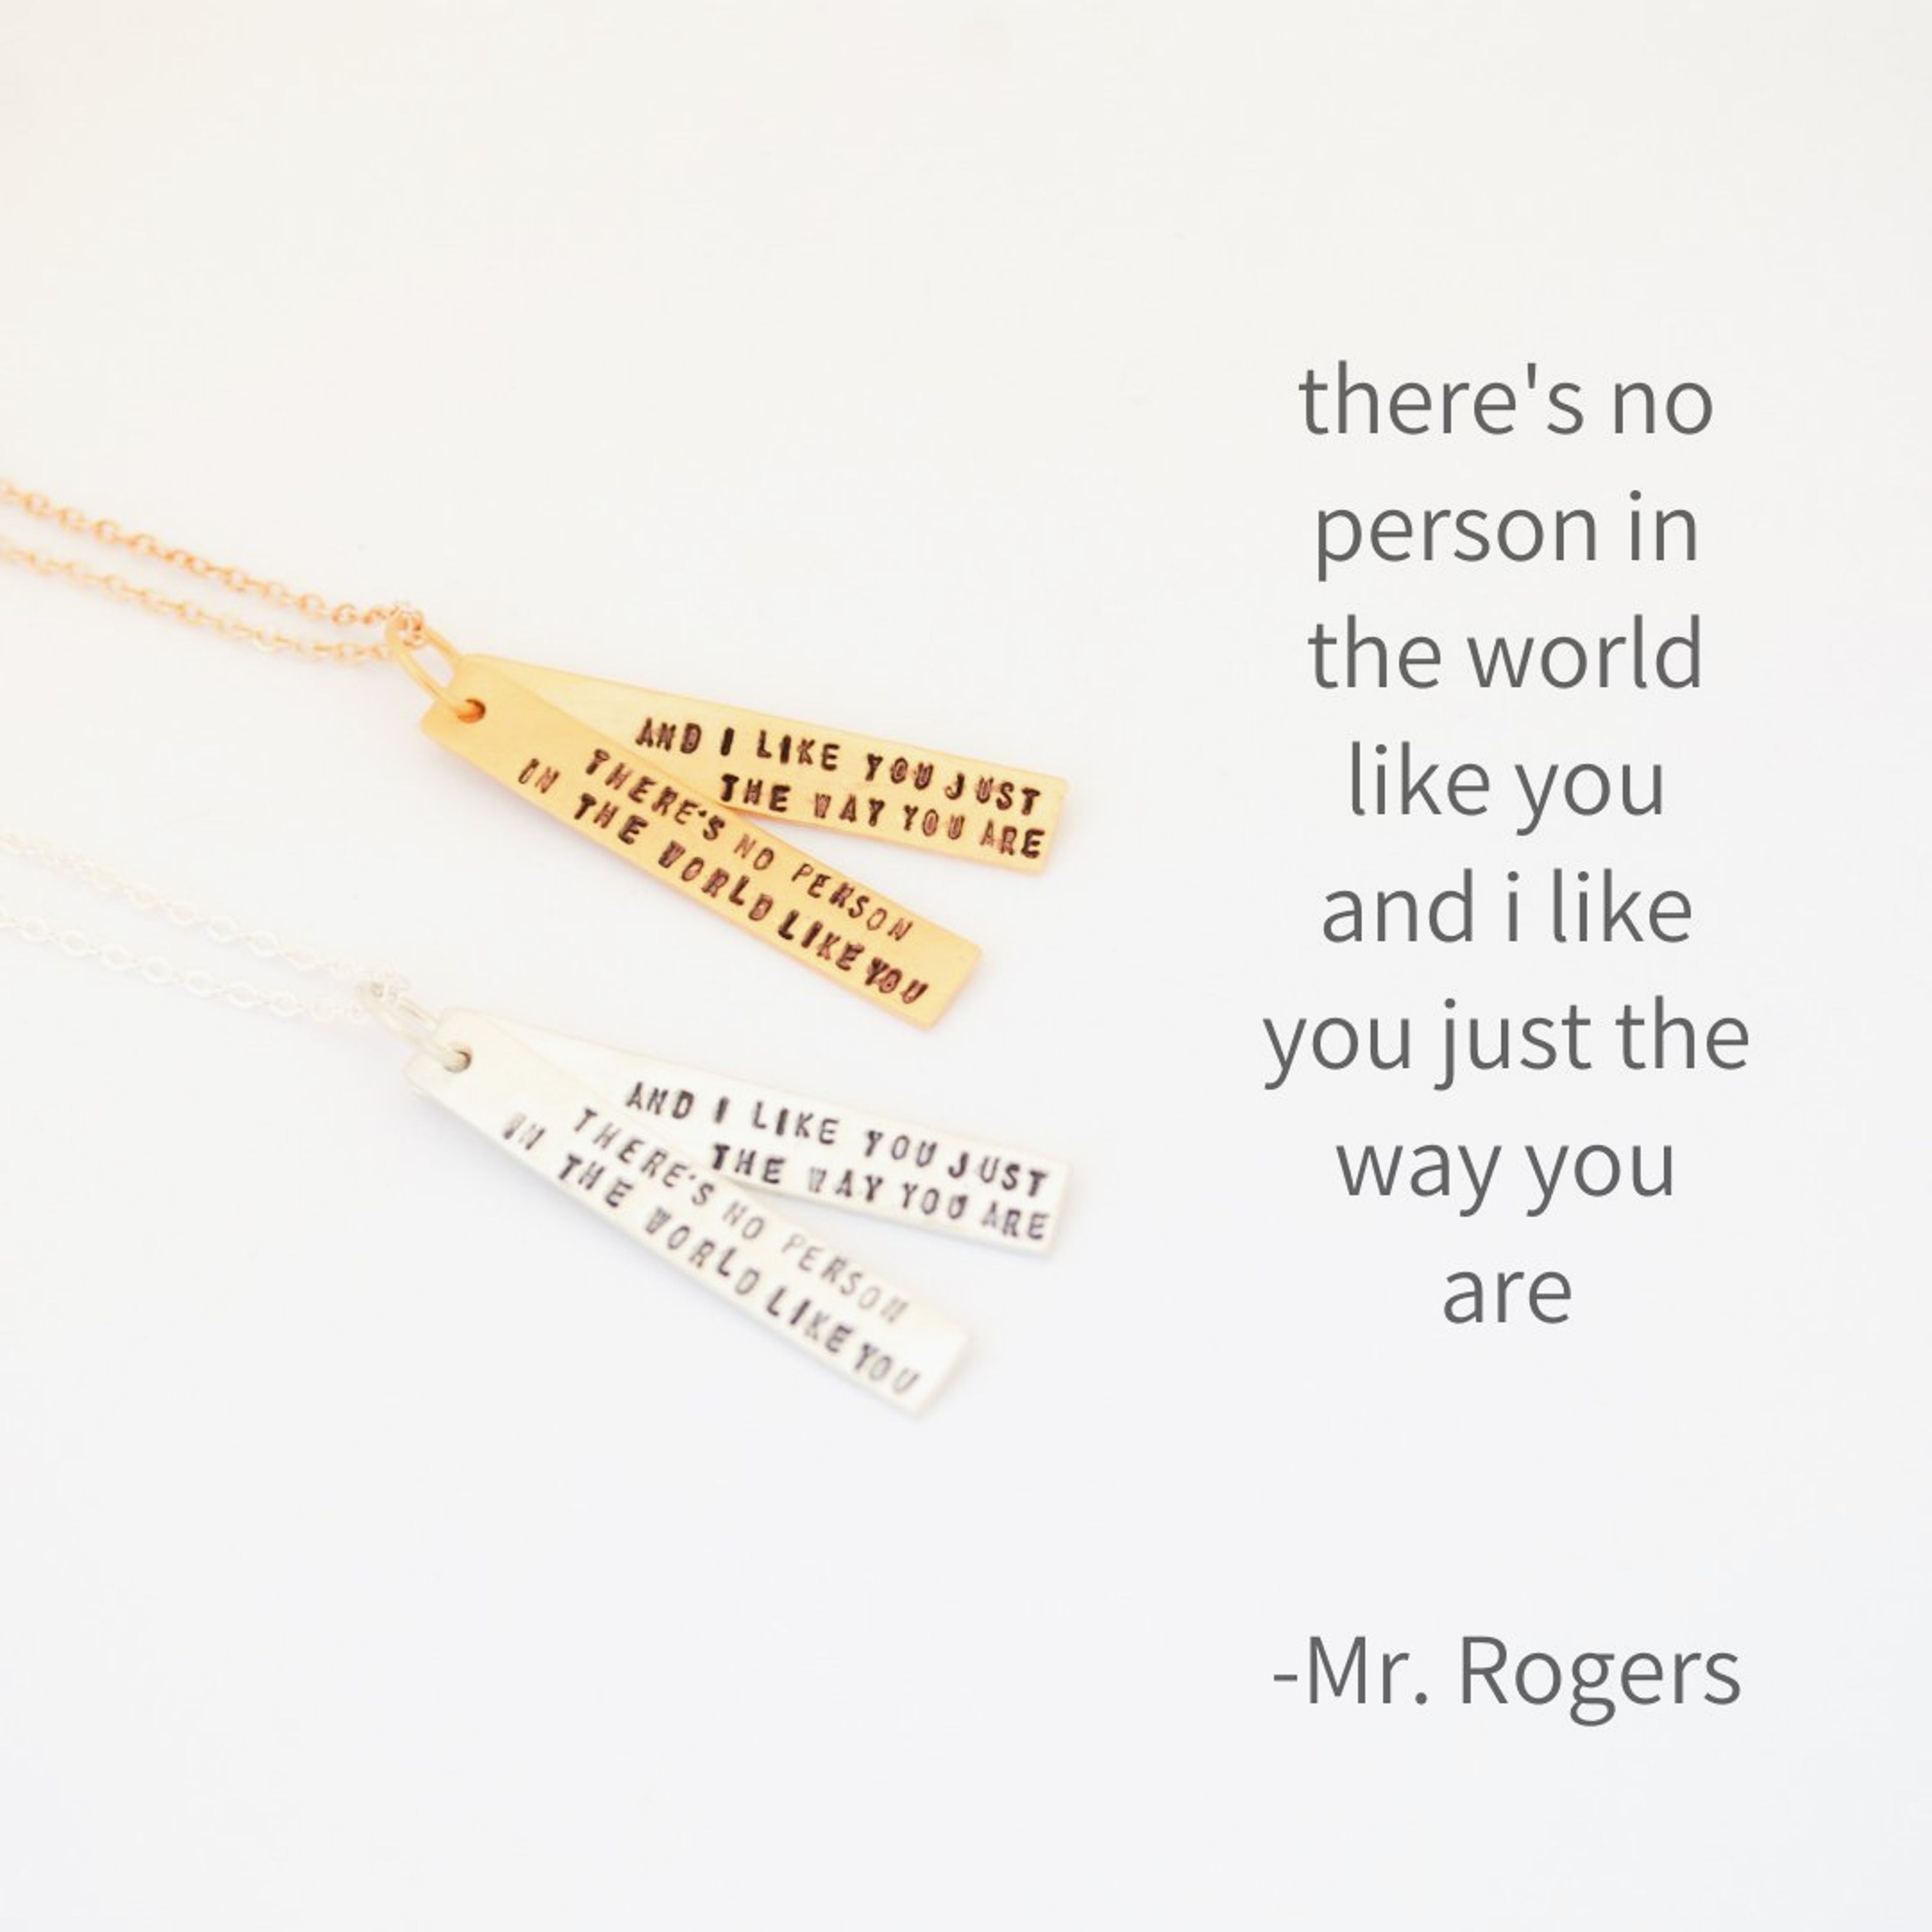 "There is no person in the world like you and I like you just the way you are" -Mister Rogers